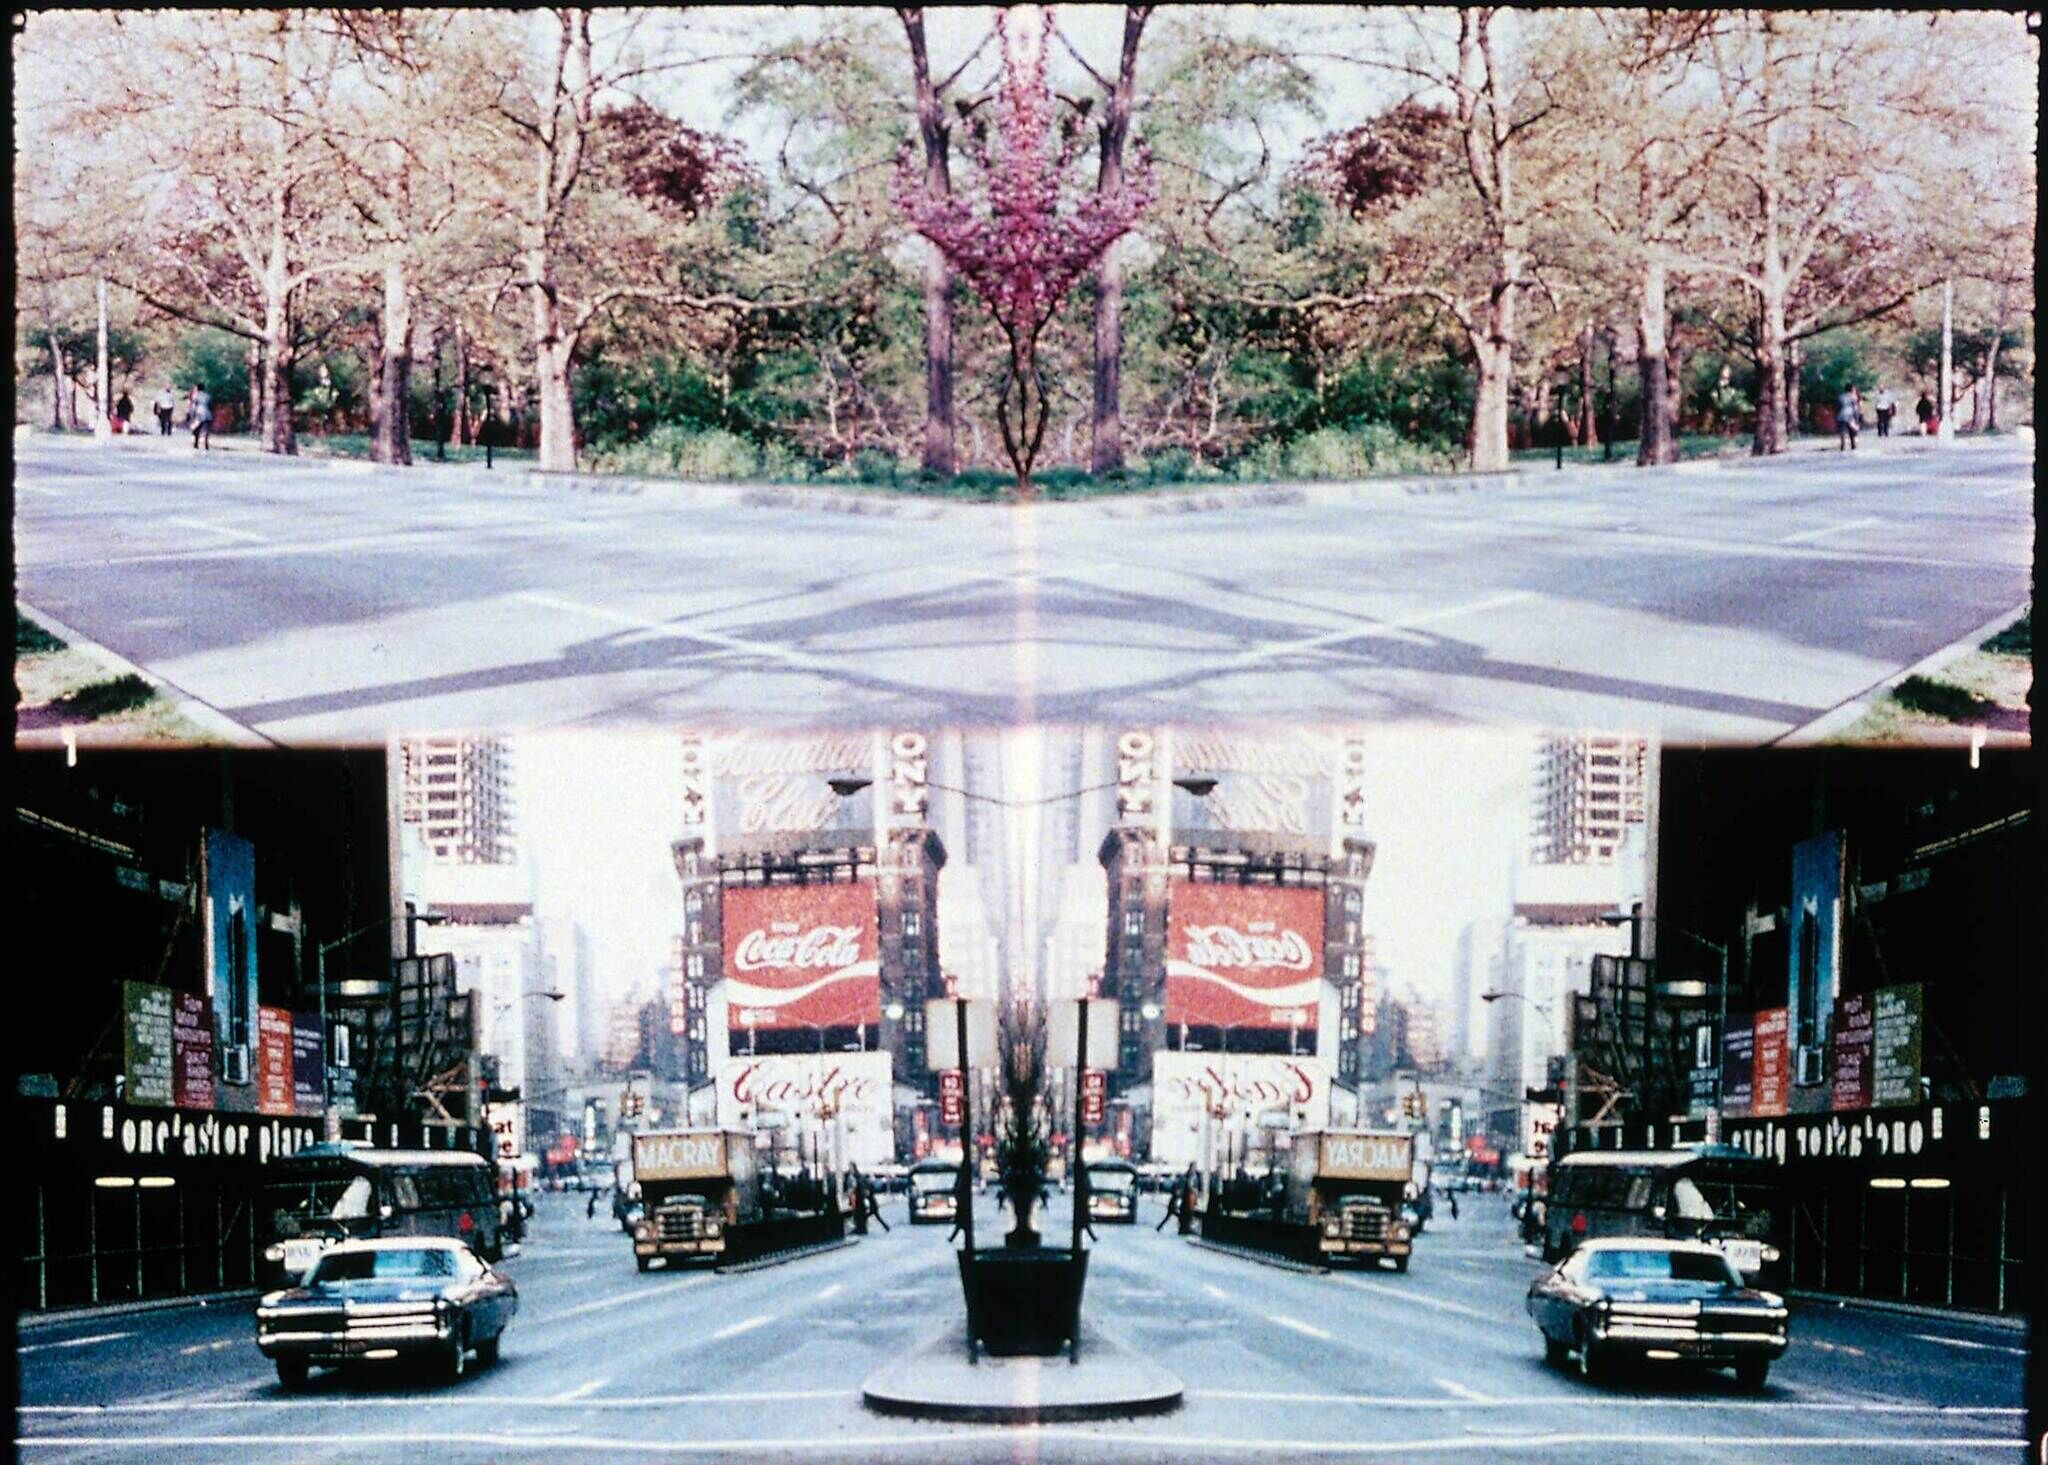 Two mirrored images stacked on top of each other. The top image is of a tree lined road, and the bottom image is of Times Square.